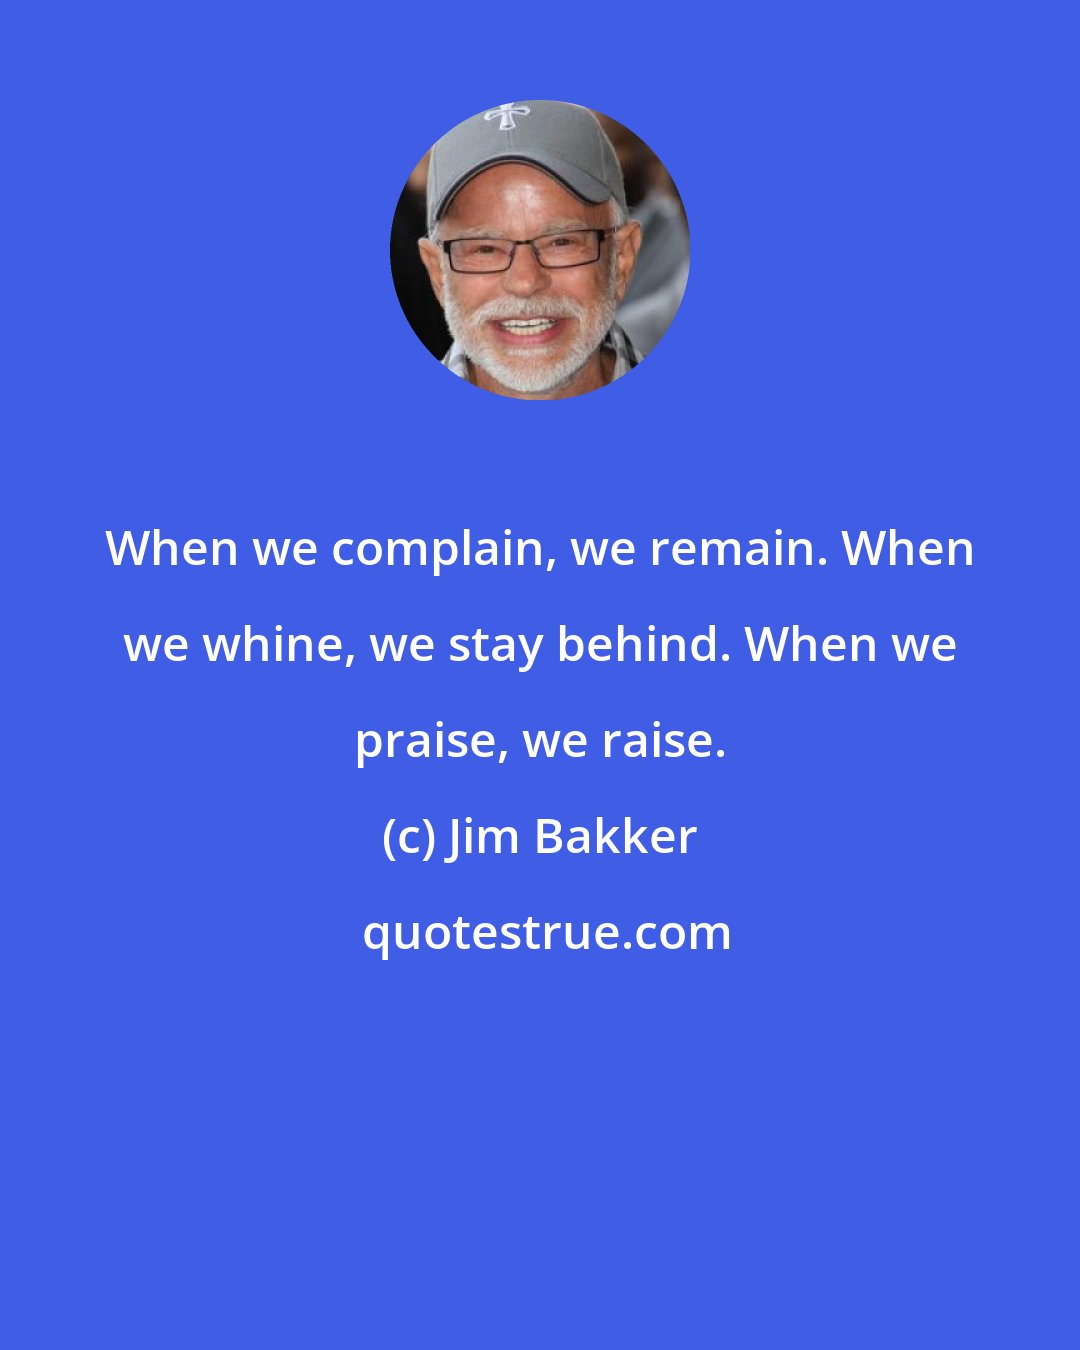 Jim Bakker: When we complain, we remain. When we whine, we stay behind. When we praise, we raise.